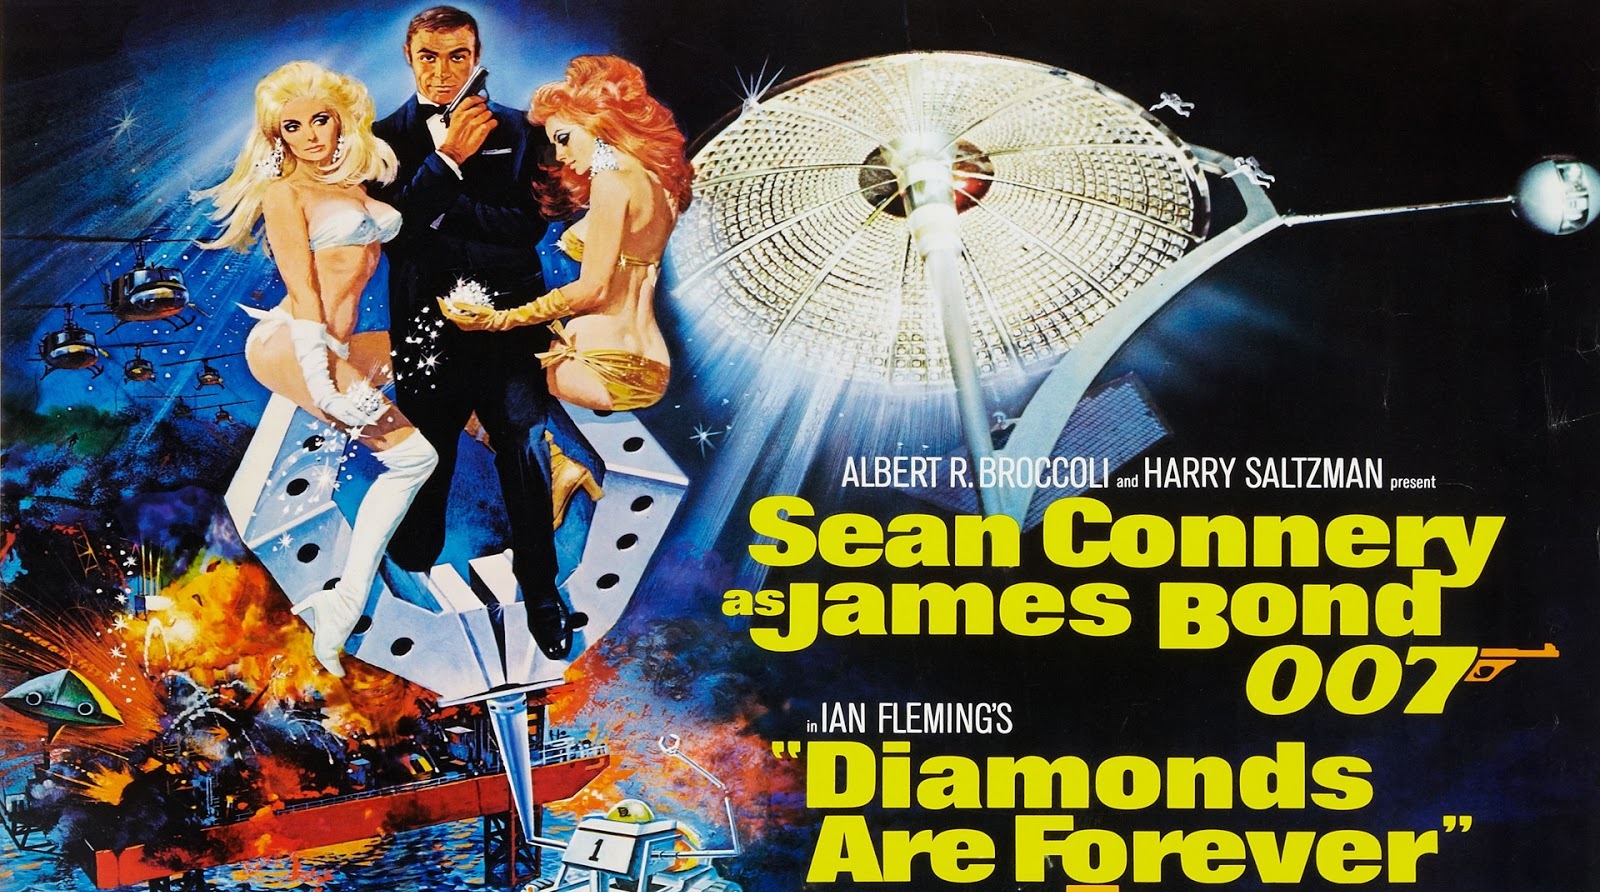 35-facts-about-the-movie-diamonds-are-forever